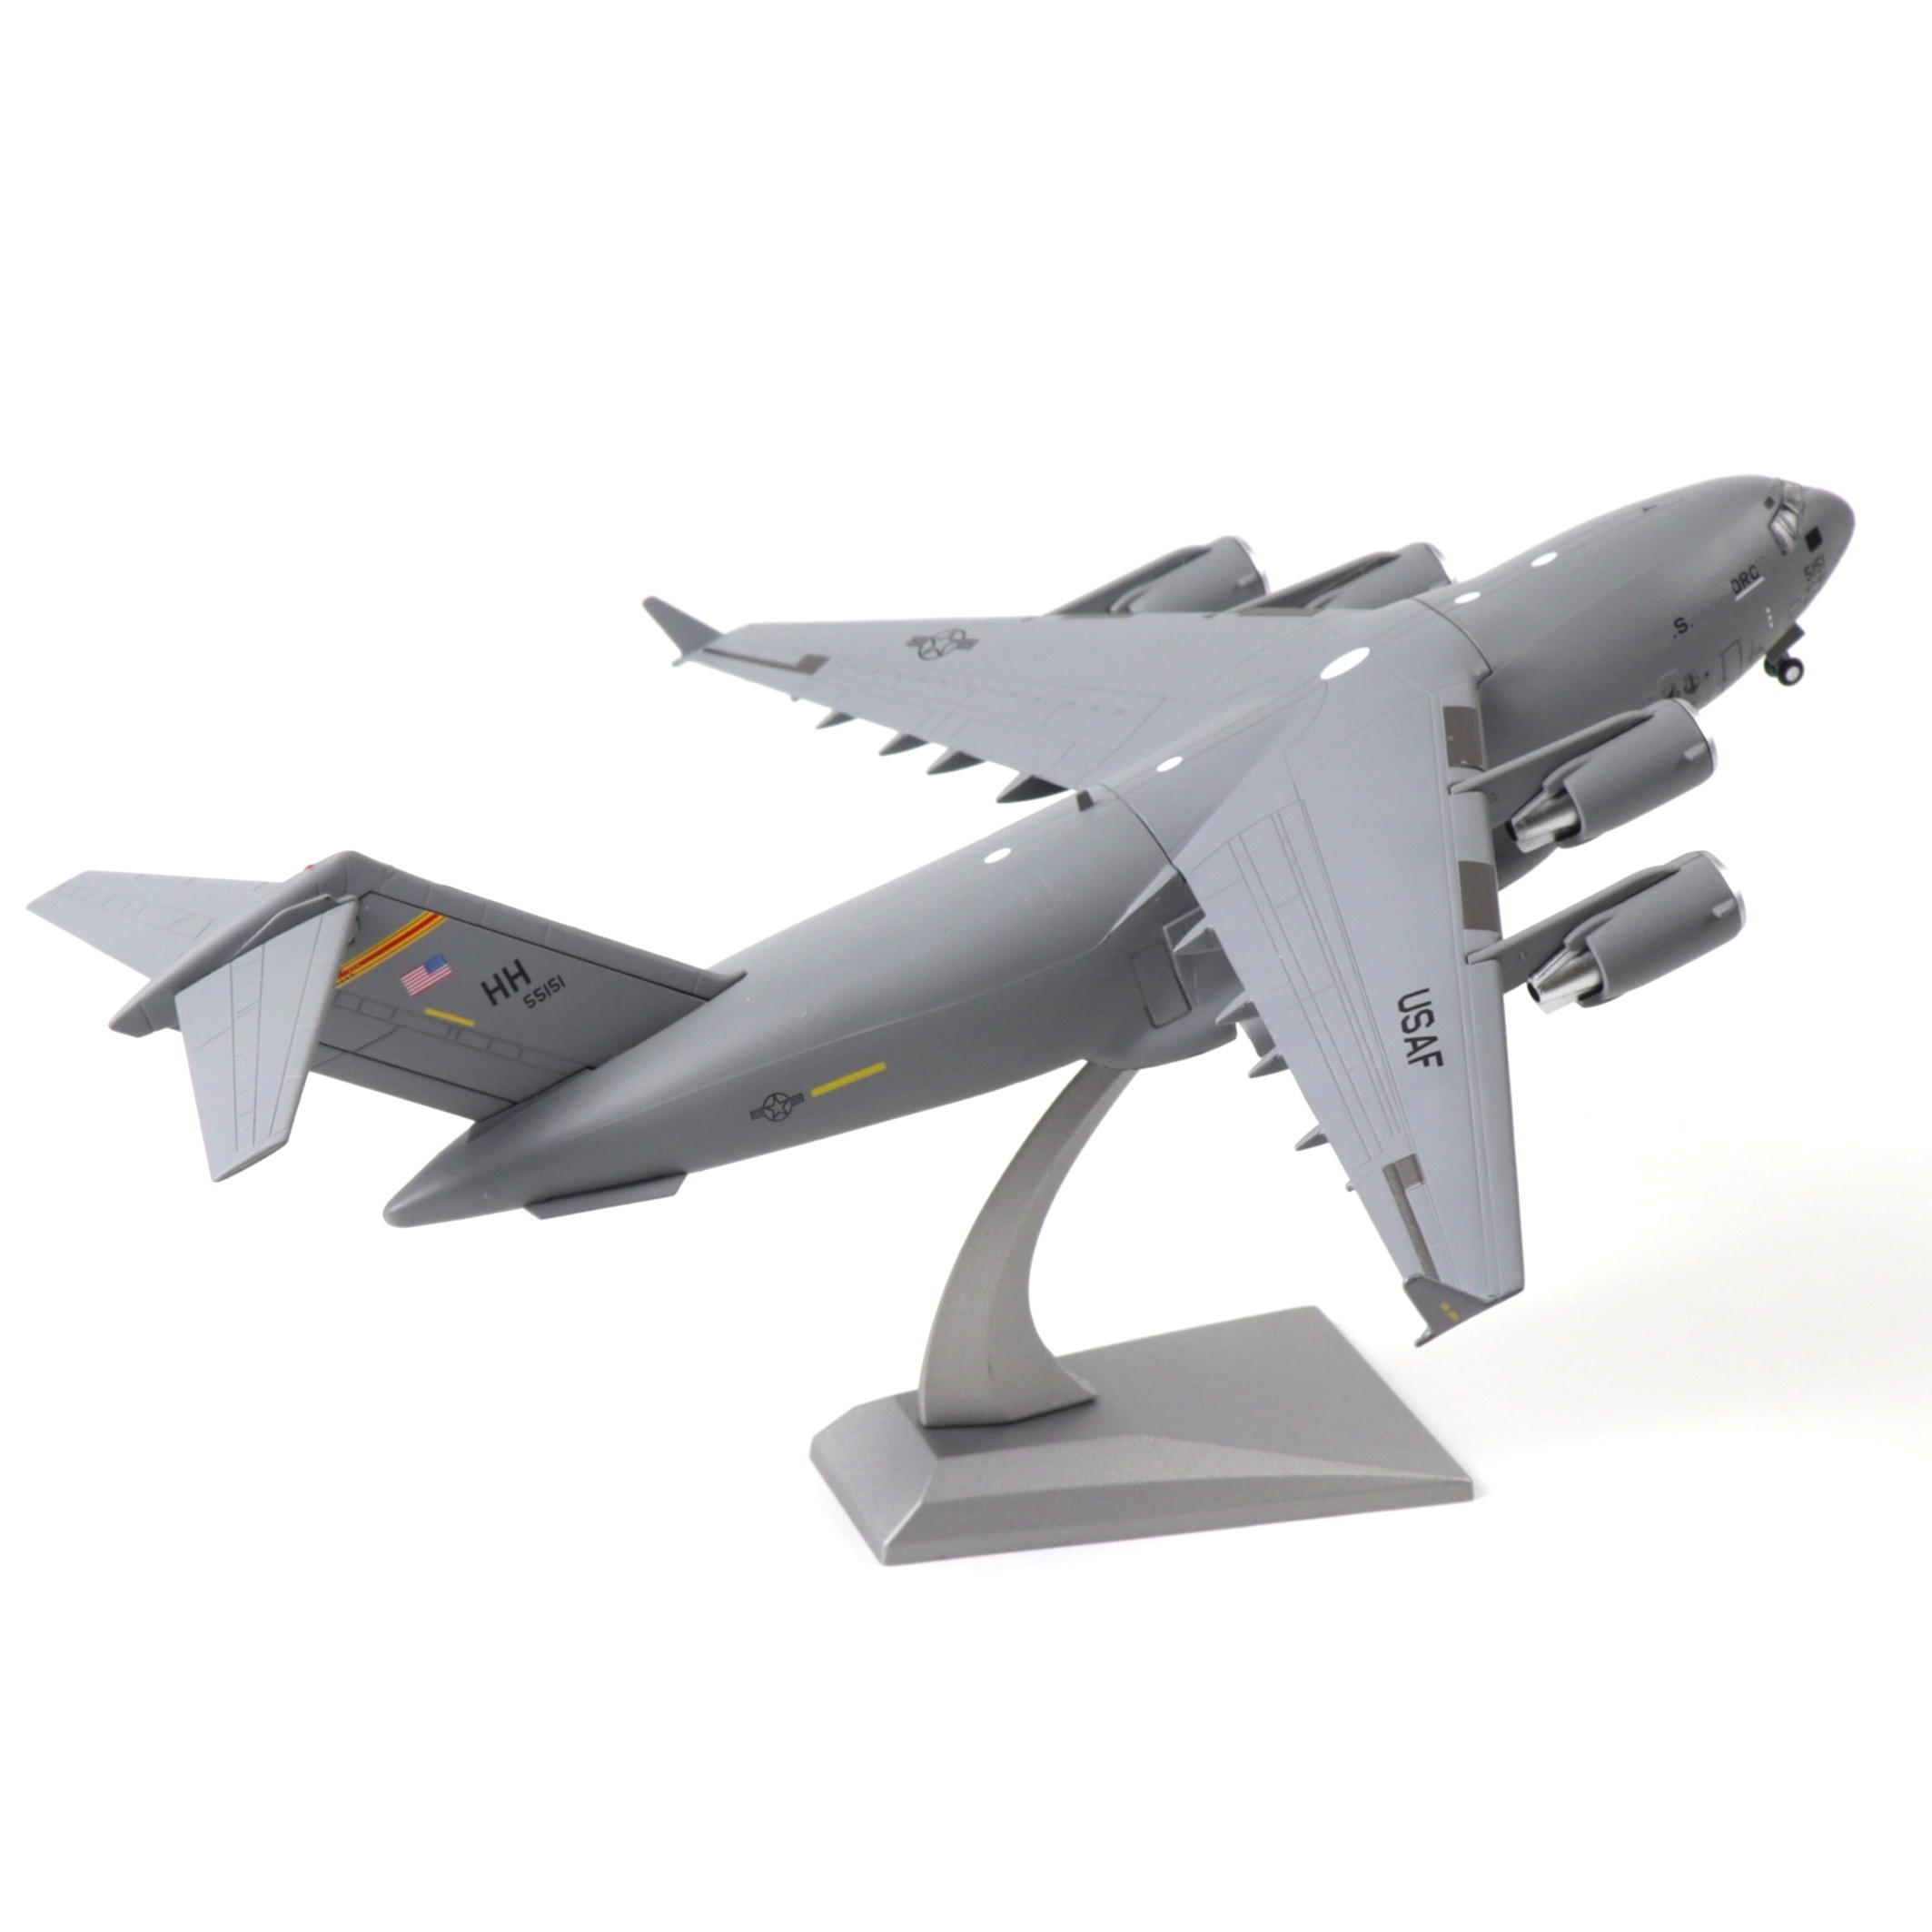 

200 Usa Globemaster C-17 Diecast Airplanes: A Military Display Model Aircraft Collection For The Avid Collector